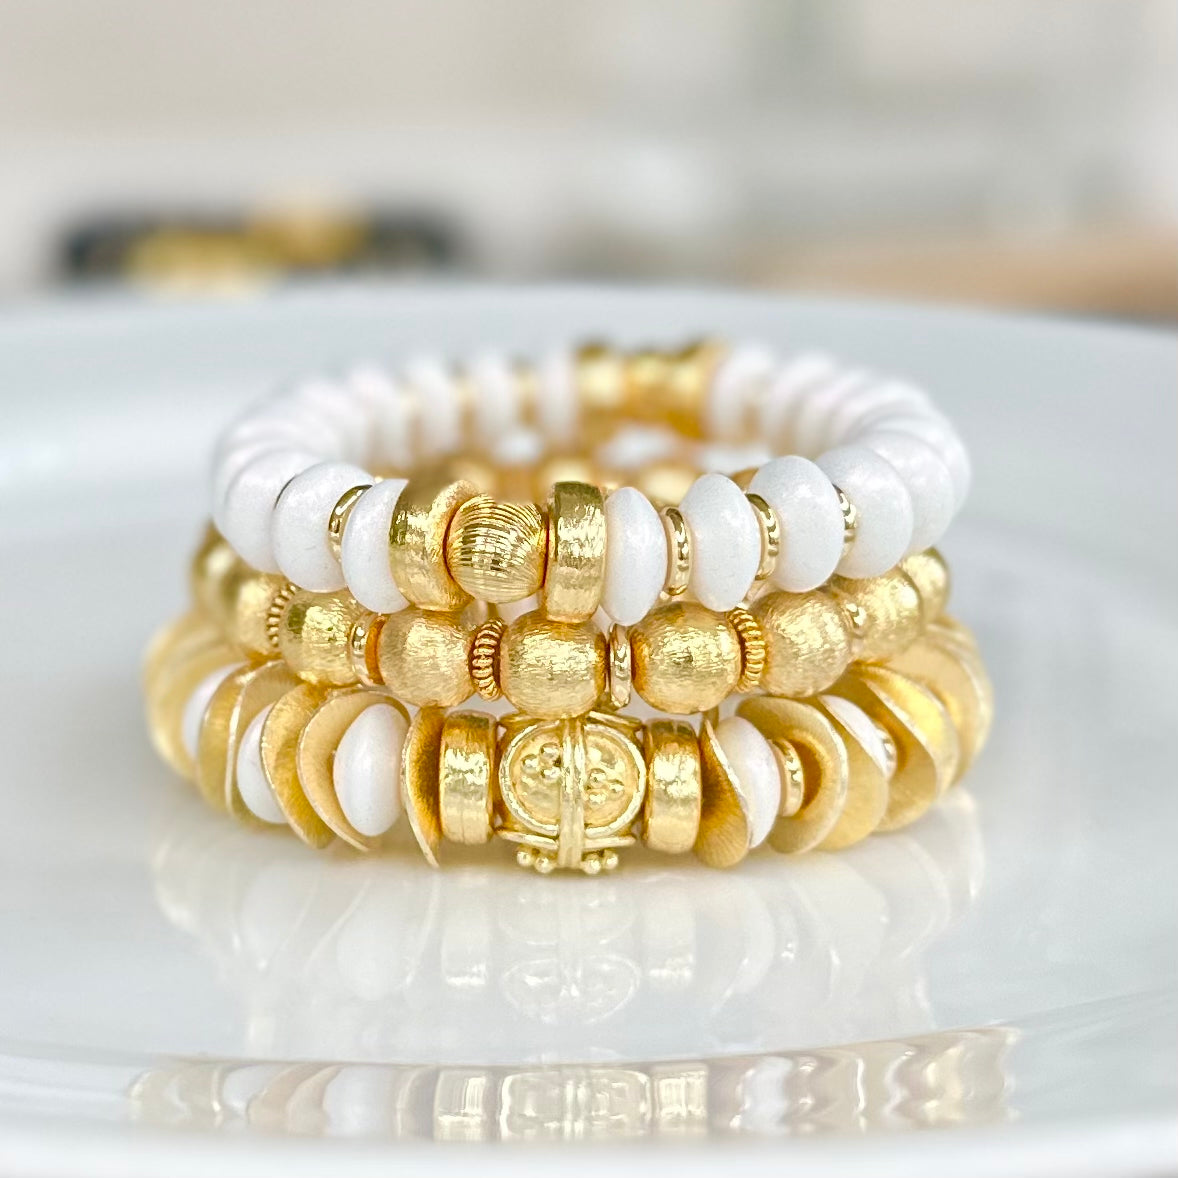 NEW! GOLD WAVY DISC AND WHITE OPALIZED STATEMENT BRACELET